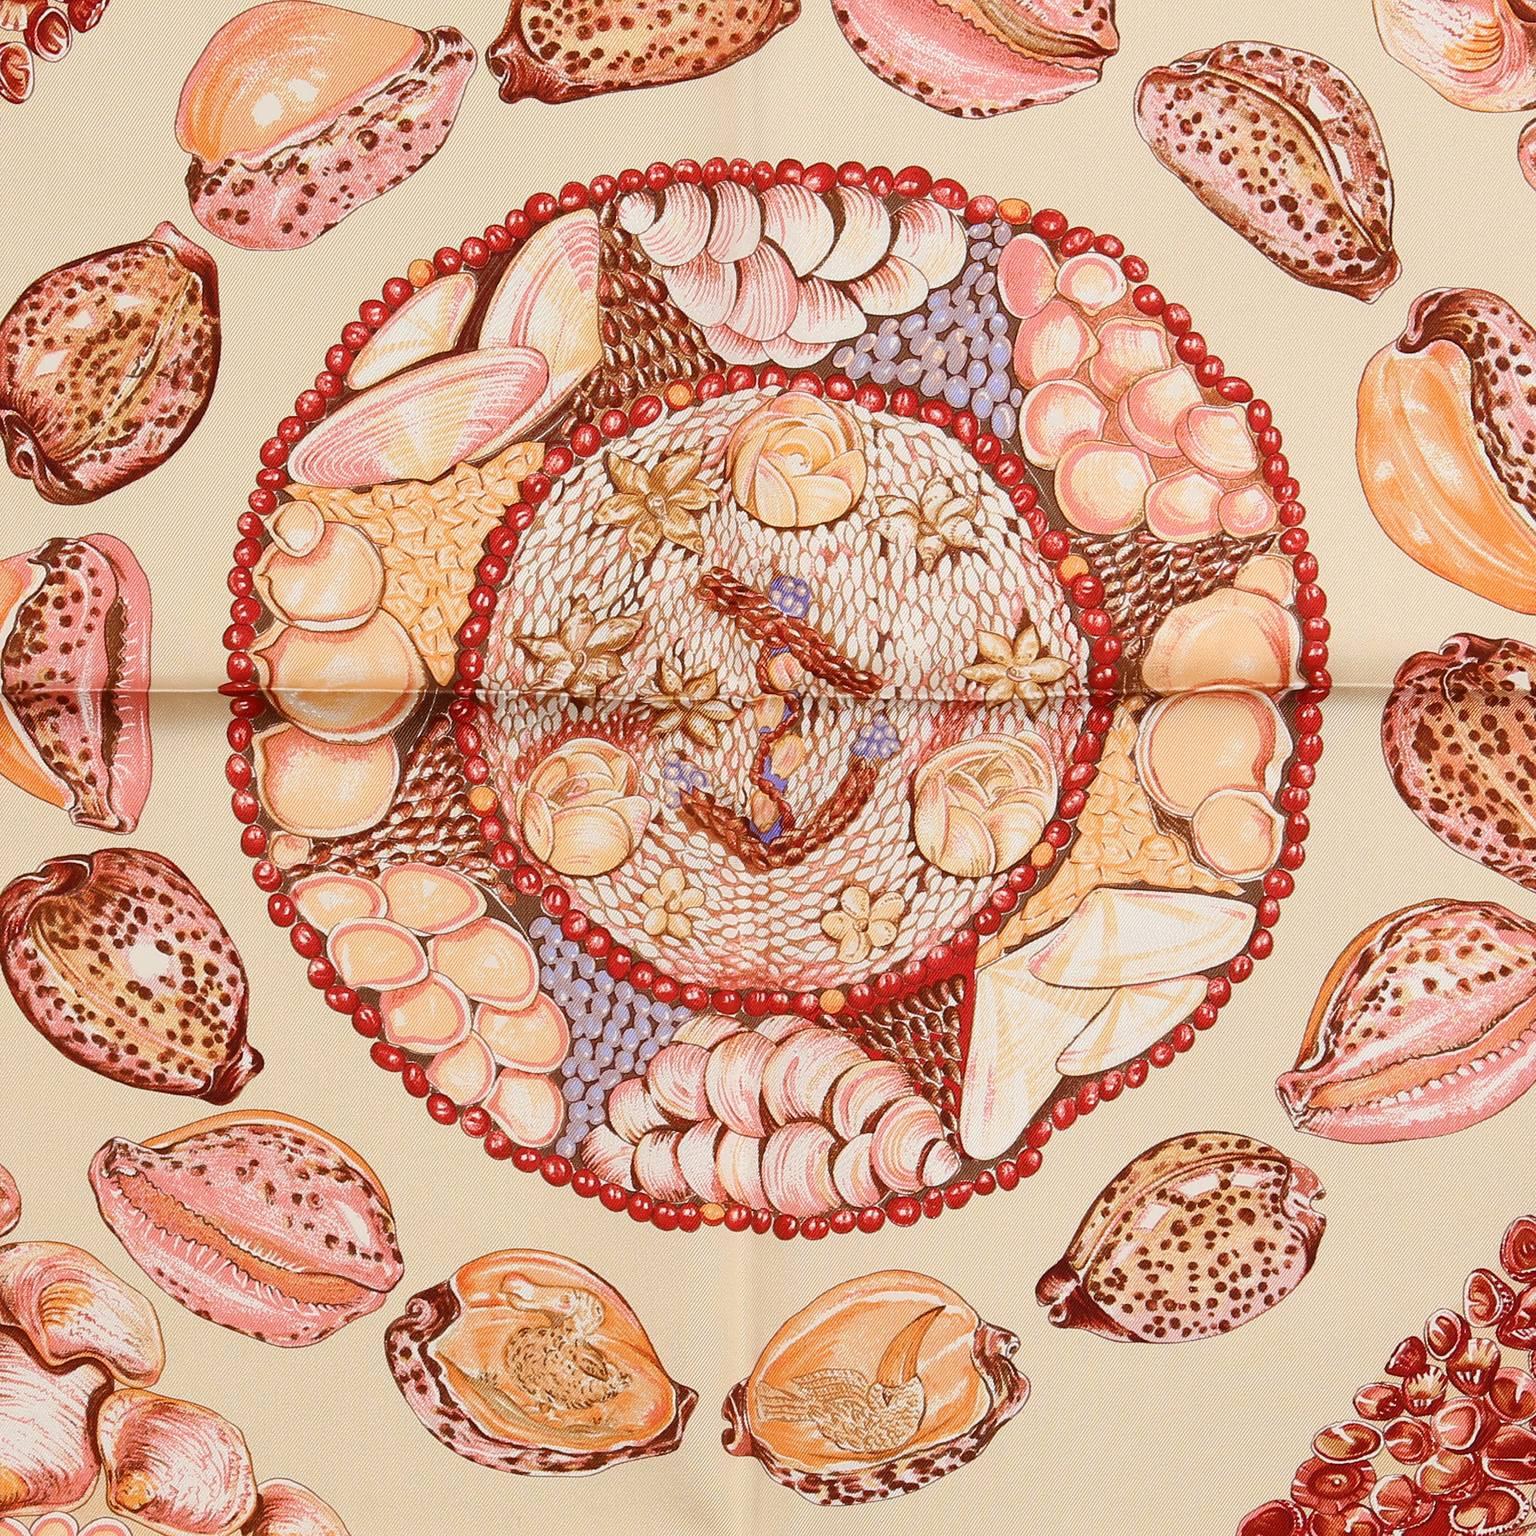  Hermès Ecru Silk Rocaille 90 cm Scarf-  NEW with the original box
 Originally designed by Valerie Dawlat-Dumolin, the print features light beige background with pink and coral colorway.  An artistic ornamental shell and pebble design commemorates